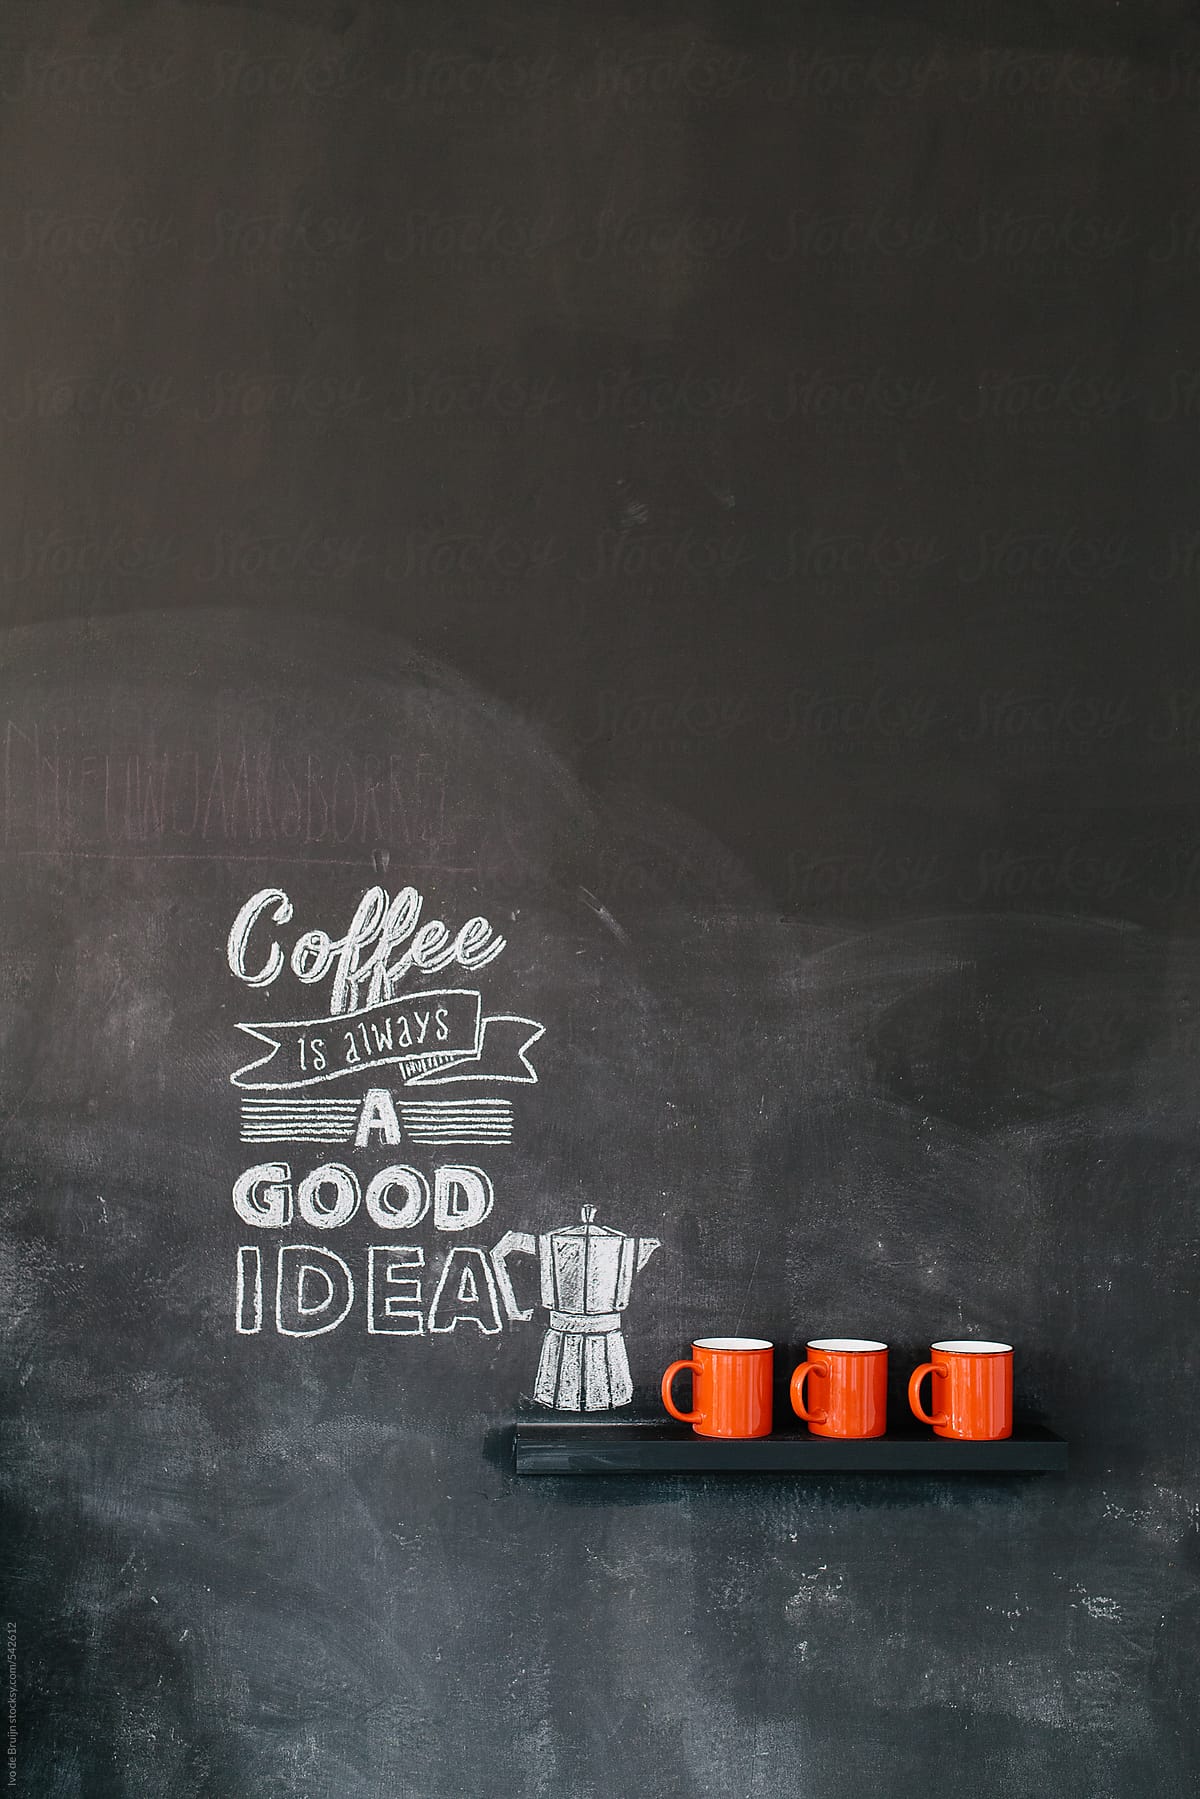 \'Coffee is always a good idea\' quote written on a blackboard, with red cups next to it